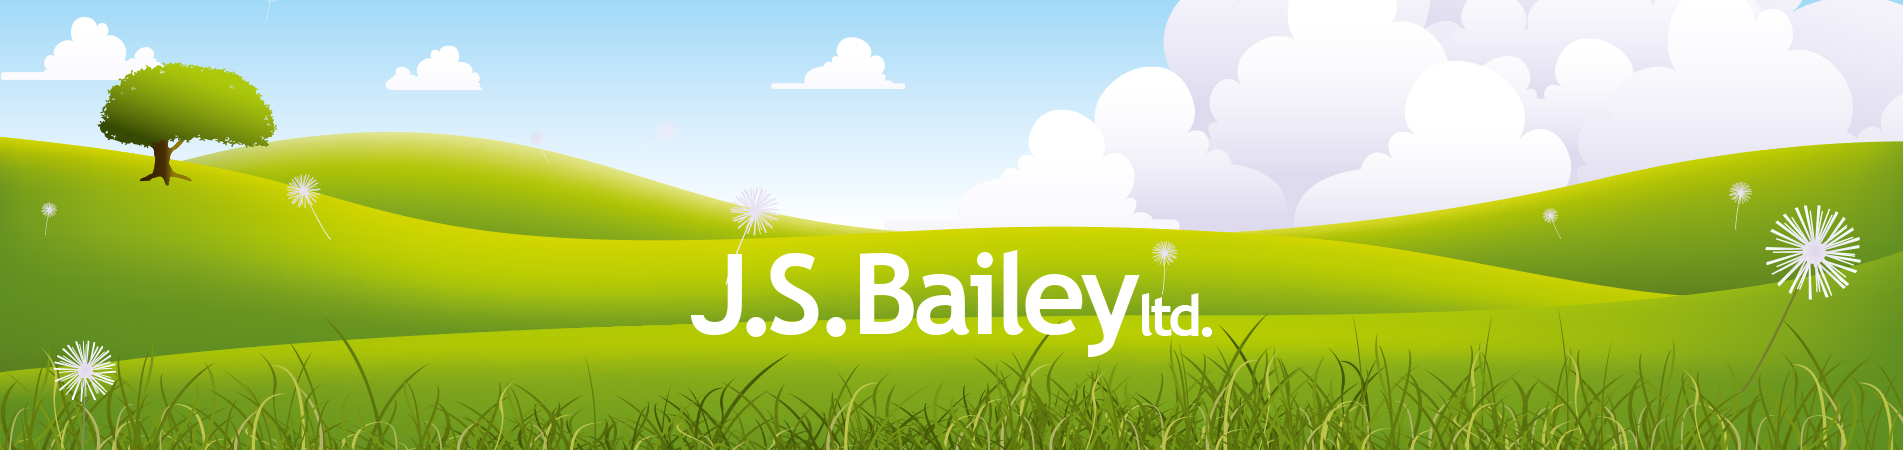 The success of our client J.S. Bailey